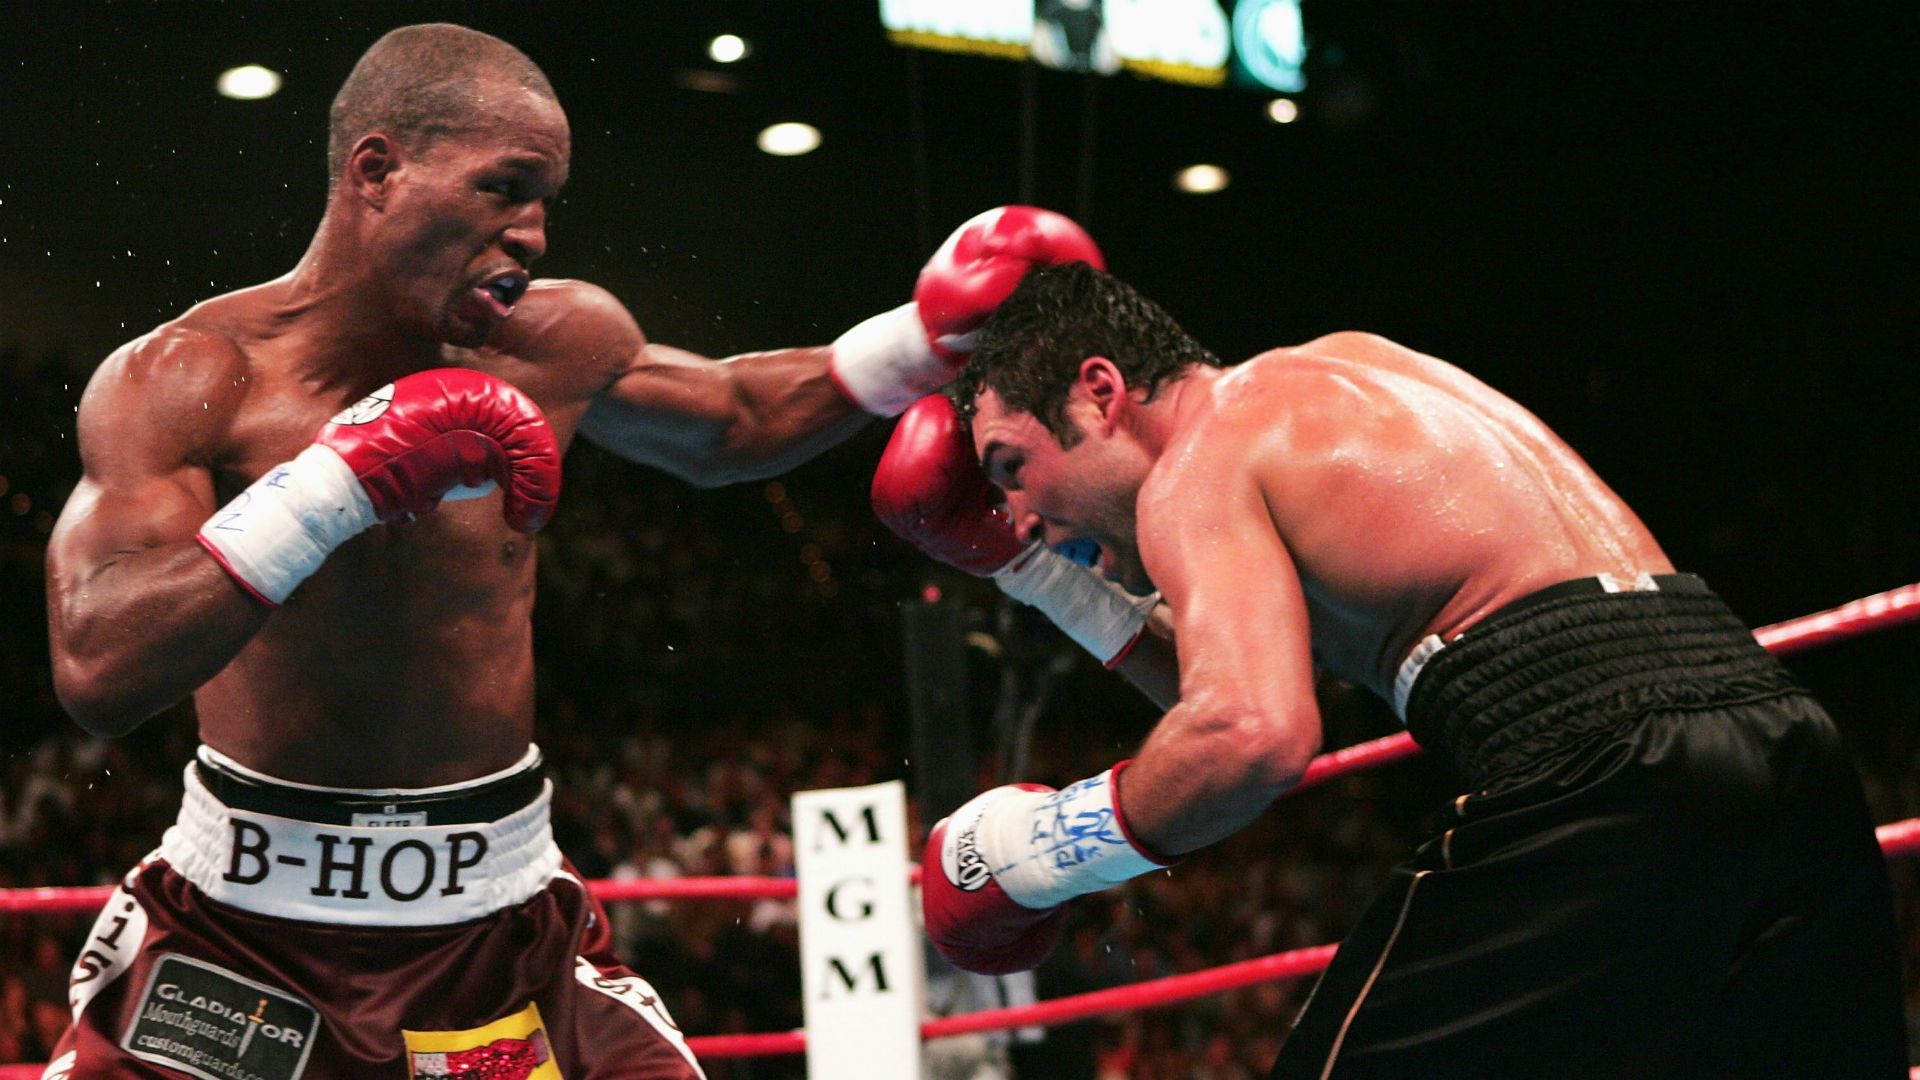 Bernard Hopkins reflects on his best fights and his legacy as he enters final fight